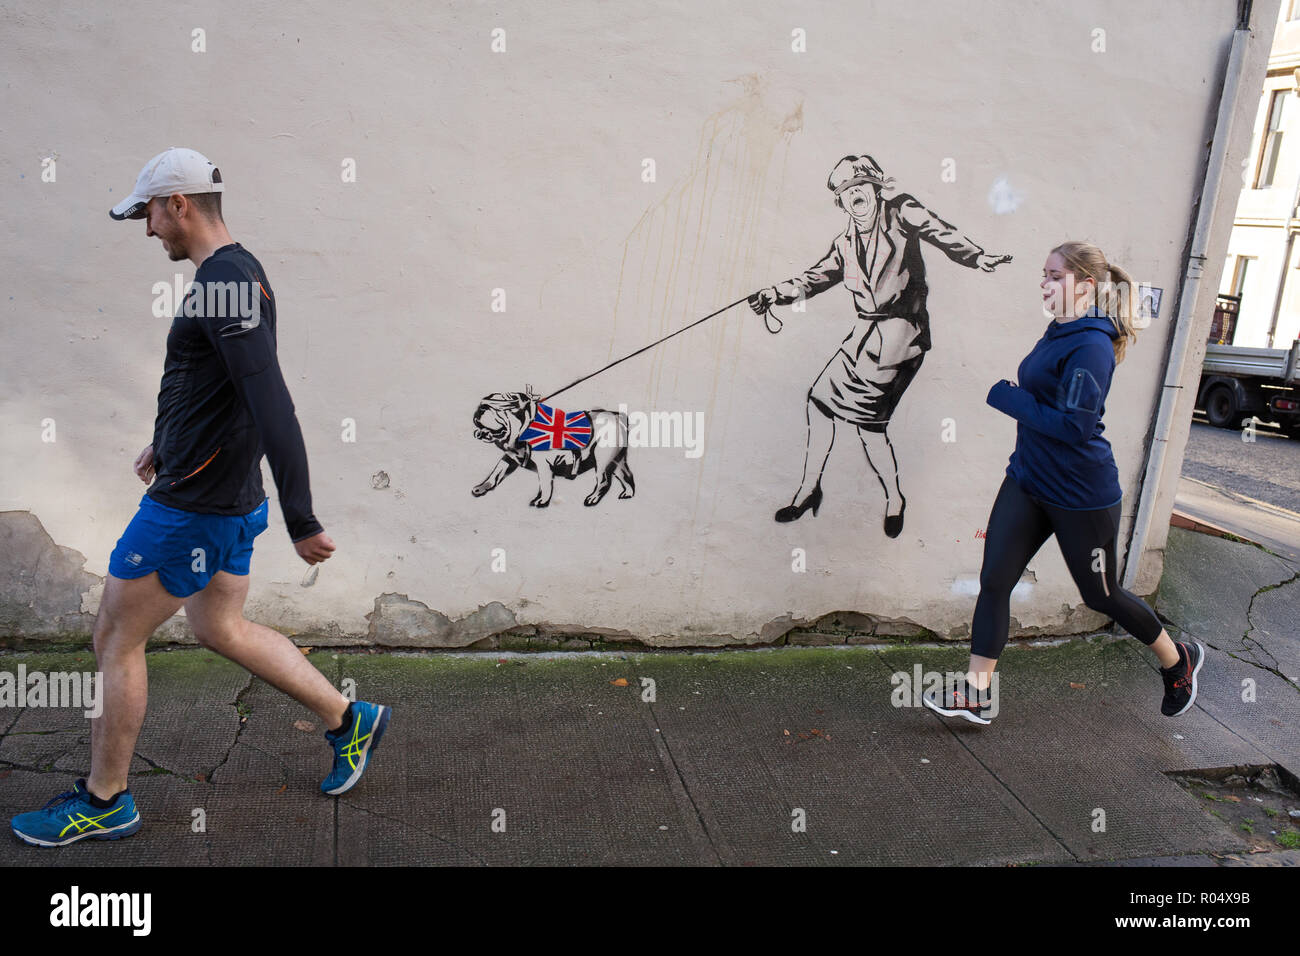 Glasgow, Scotland, 1st November 2018. A blindfolded Prime Minister Theresa May leading a British bulldog wearing a Union jack coat - a Brexit commentary street art stencilled graffiti /mural by the artist known as 'The Pink Bear Rebel', in the West End of Glasgow, Scotland, on 01 November 2018. Image Credit: Jeremy Sutton-Hibbert/Alamy News Credit: jeremy sutton-hibbert/Alamy Live News Stock Photo